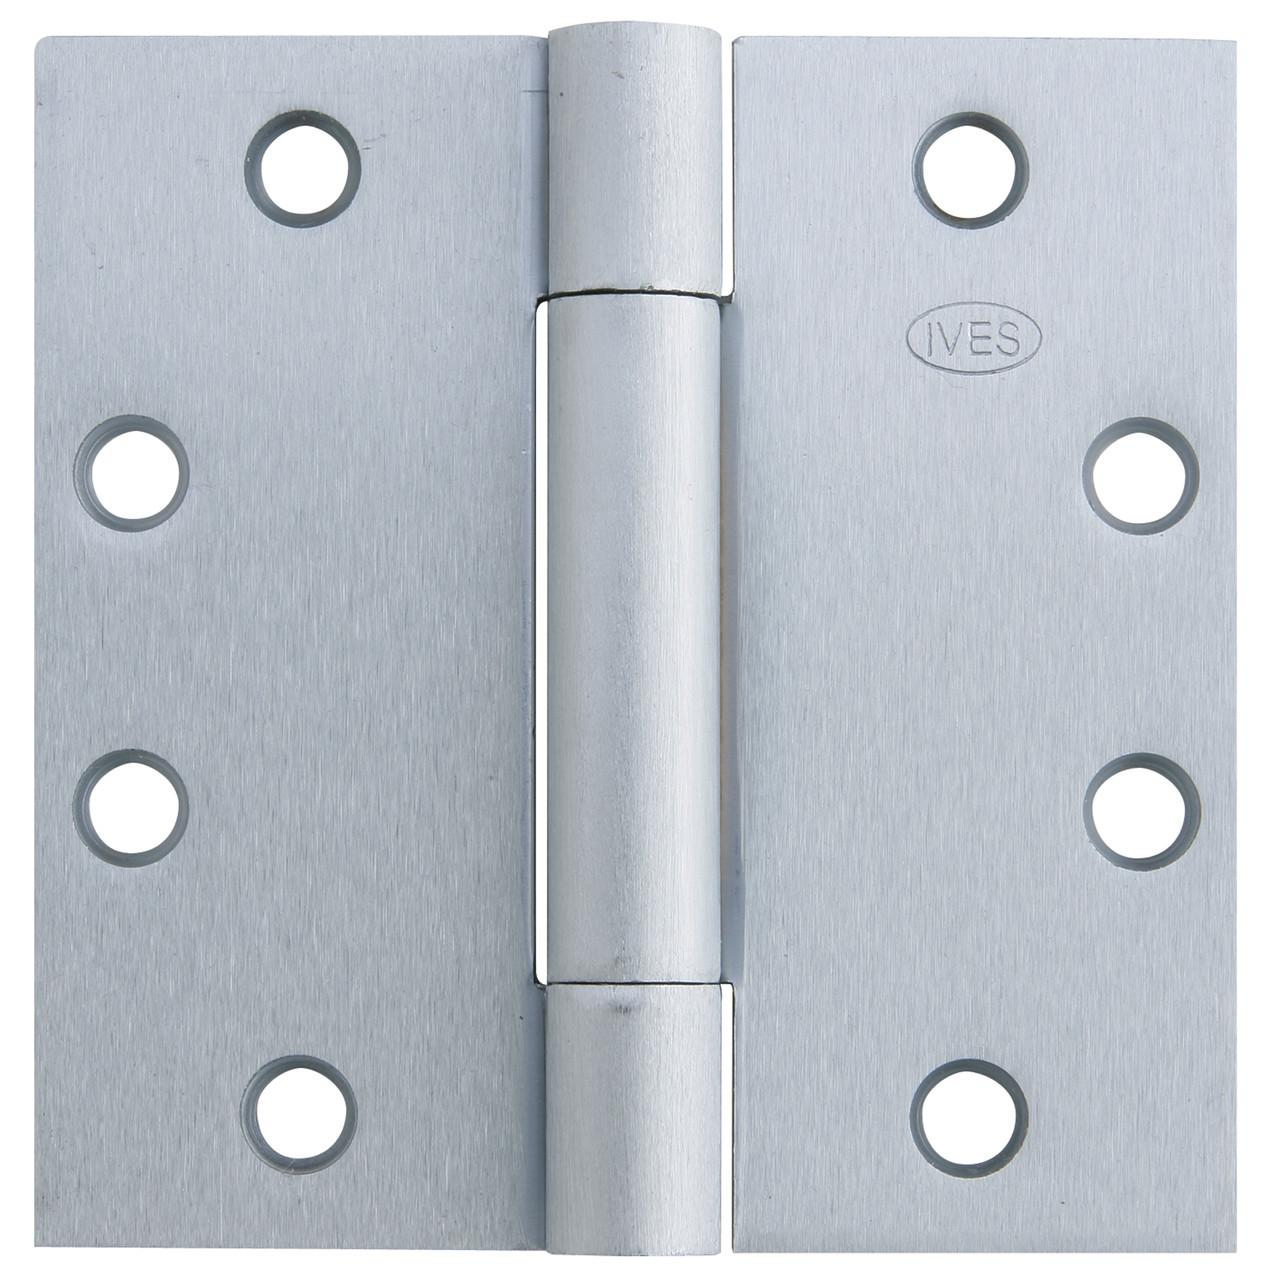 3 Ives 5BB1SC 4.5" 651/US26 Swing Clear Door Mortise Butt Hinges BRIGHT CHROME 